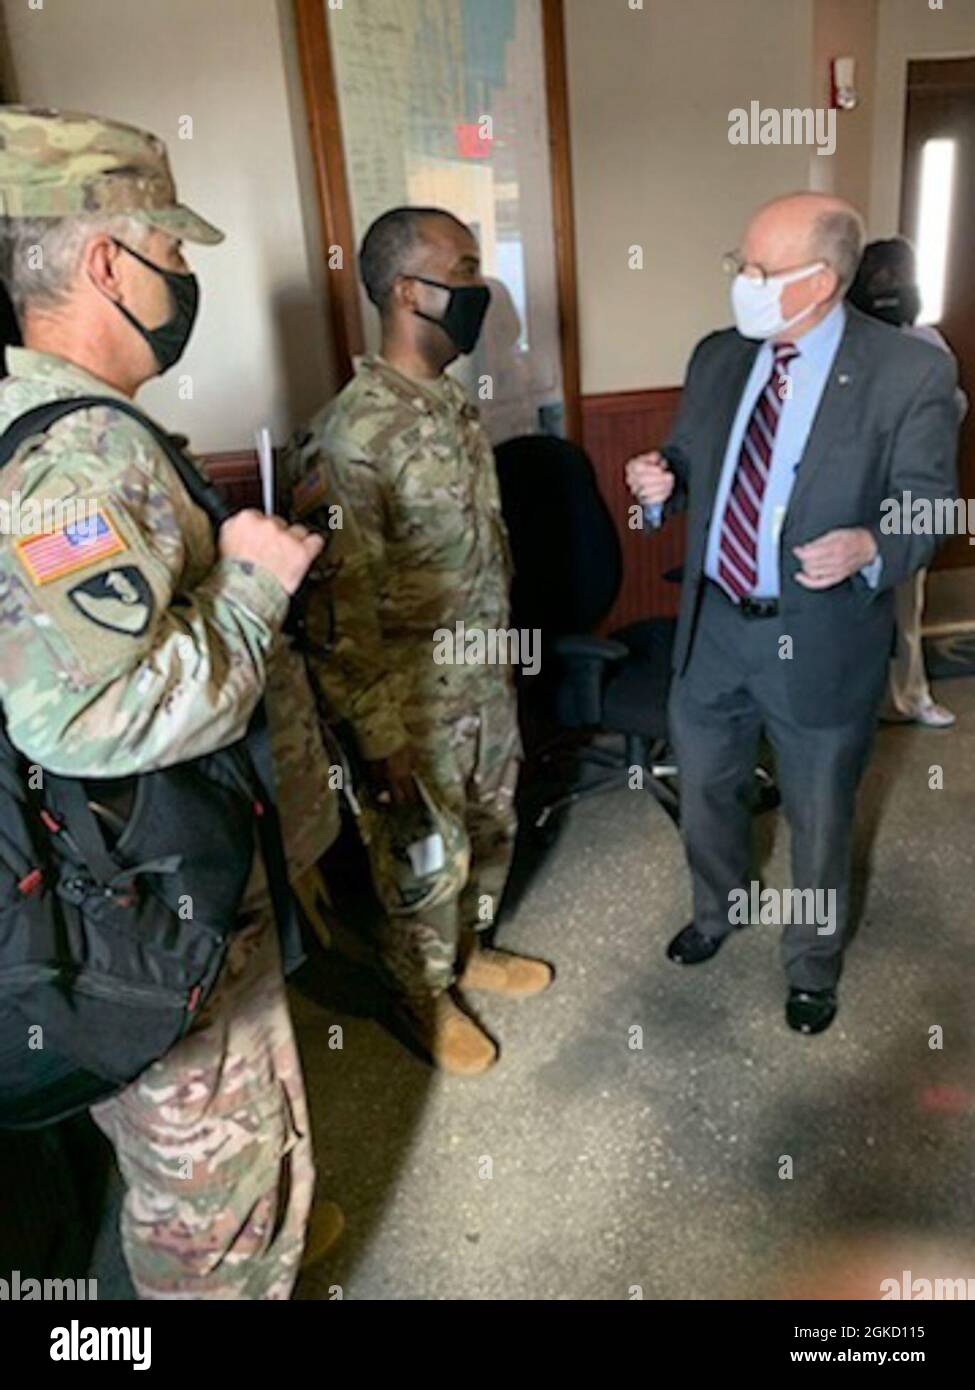 U.S. Army Corps of Engineers Jacksonville District command group Col. Andrew Kelly and south-atlantic district commander Col. Jason Kelly engage with Port Everglades director in Fort Lauderdale, Fla. Stock Photo